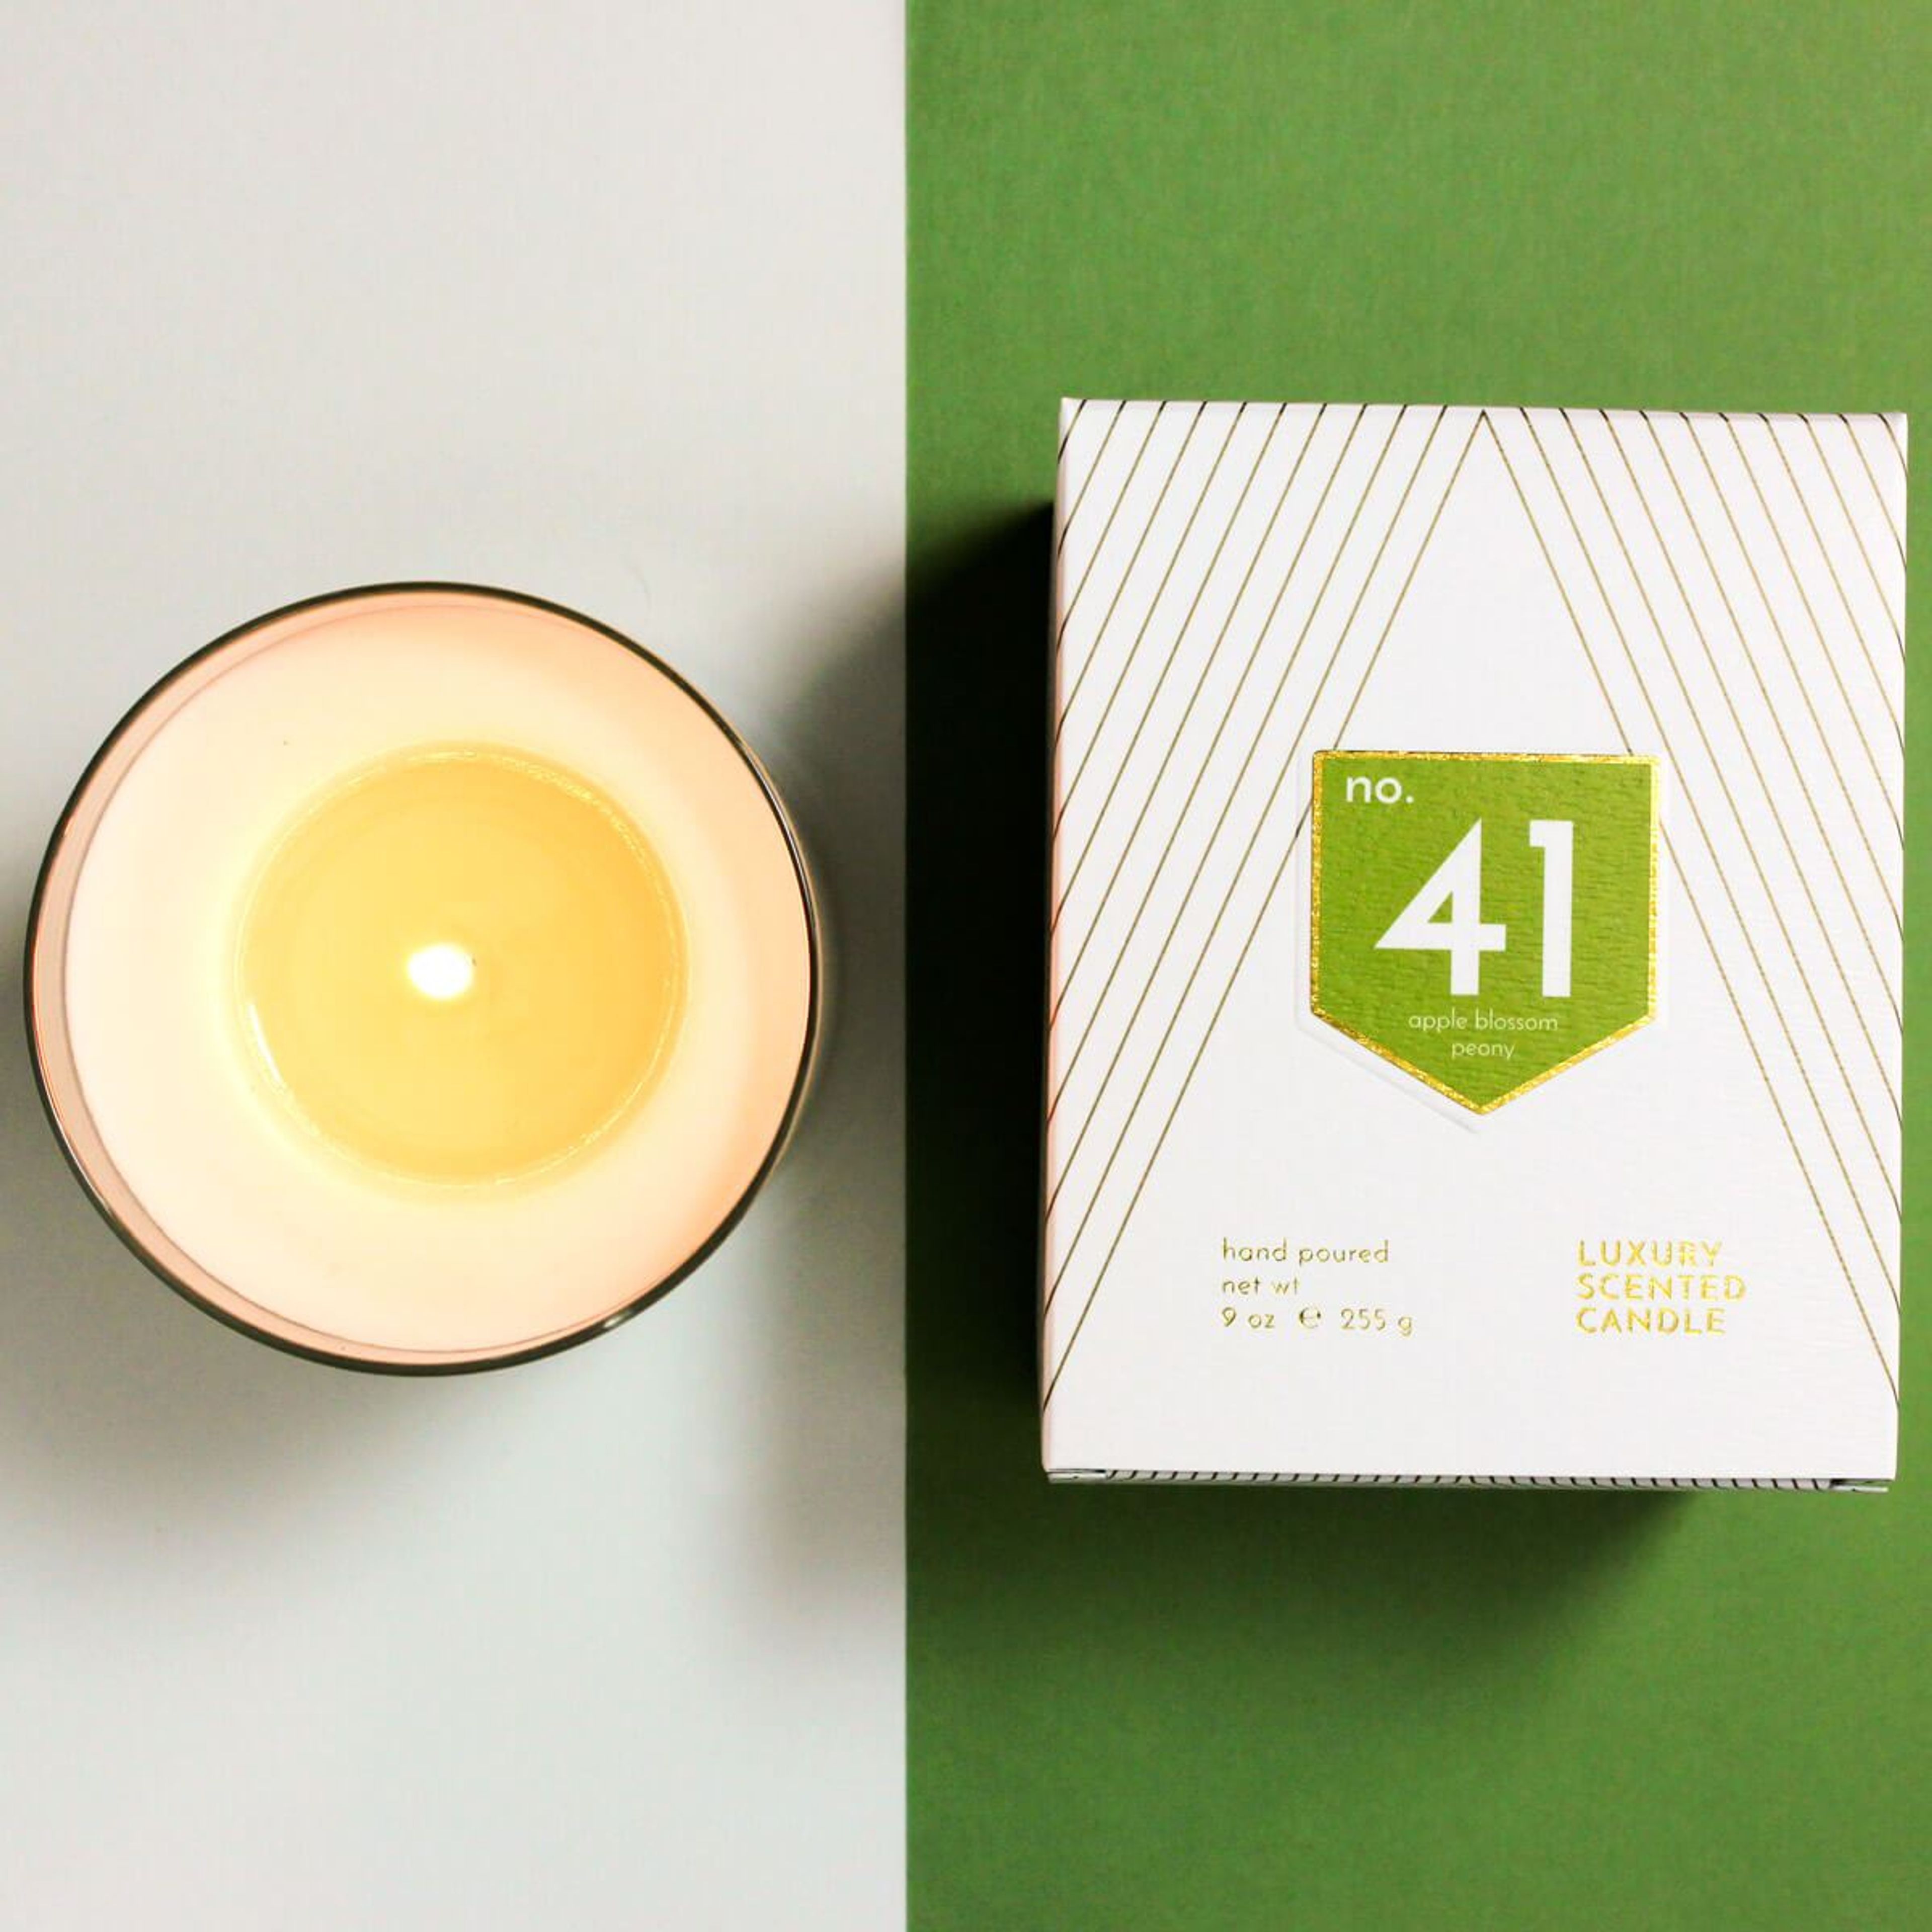 No. 41 Apple Peony Scented Soy Candle